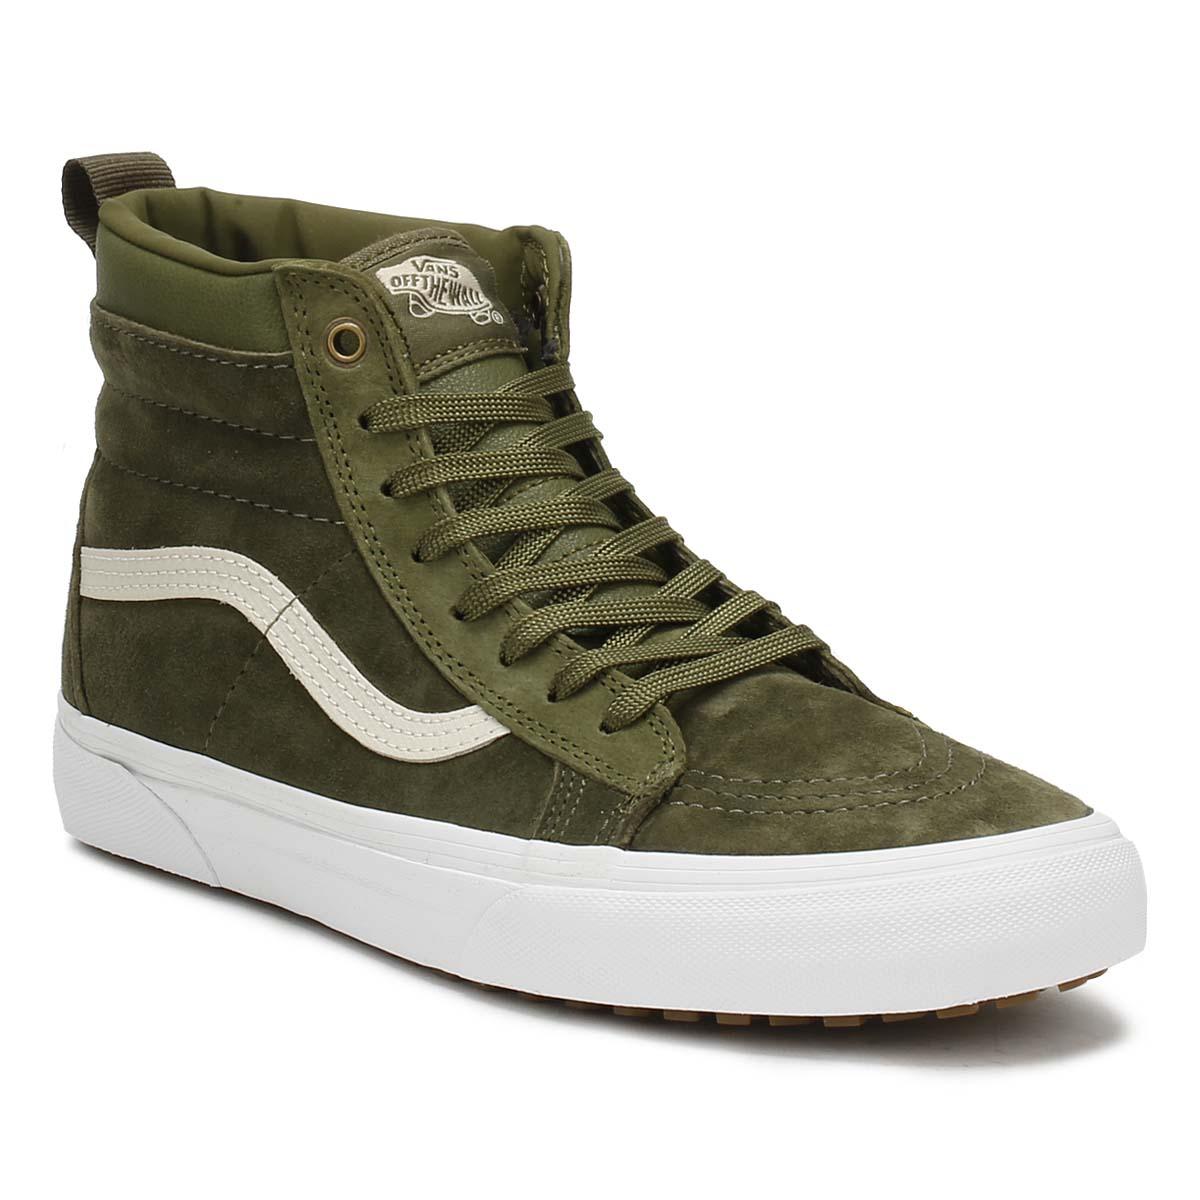 Army Green Vans High Tops - Army Military